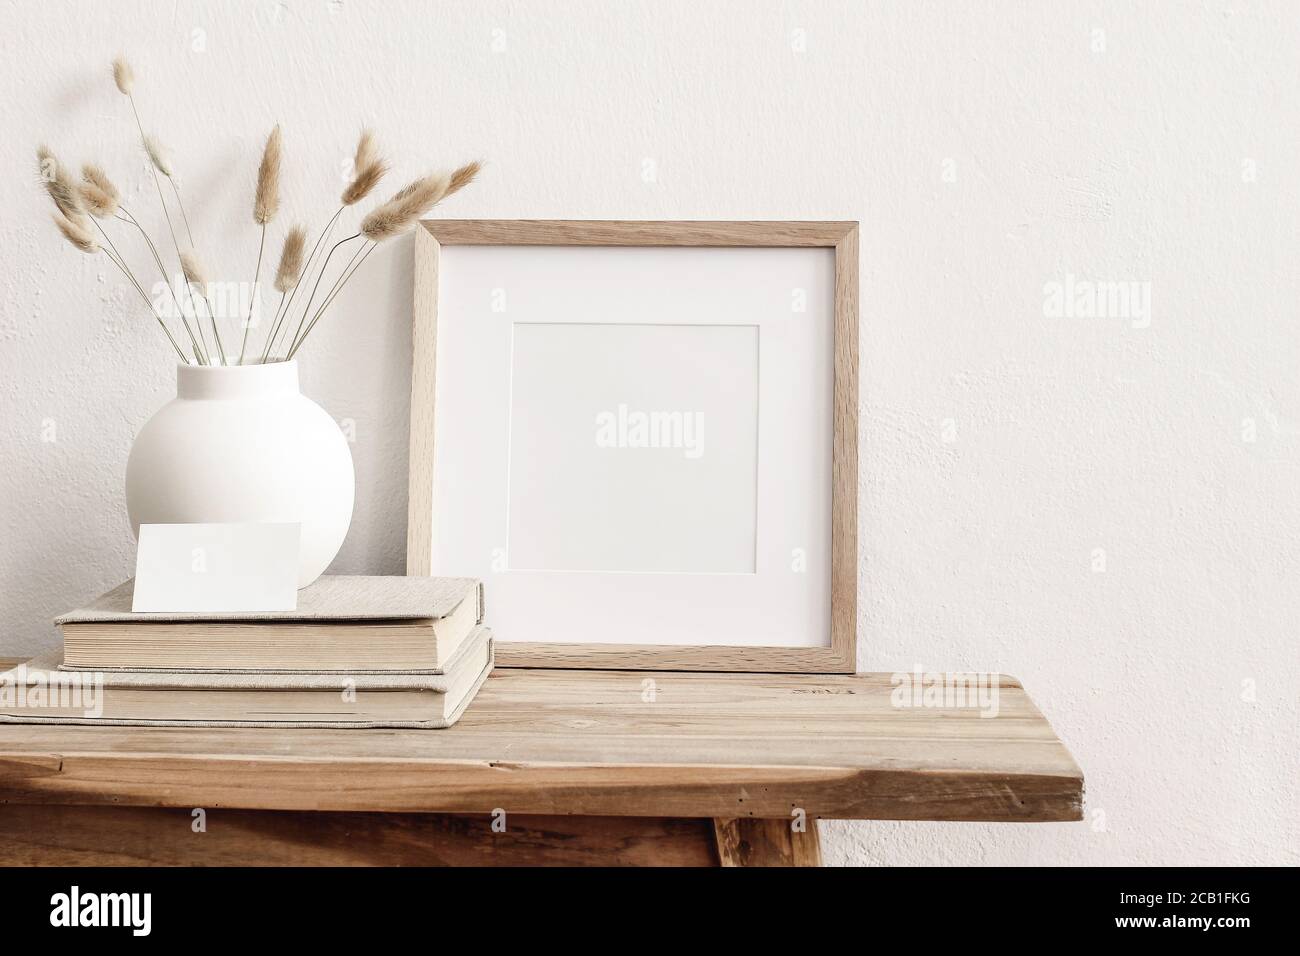 Square wooden frame mockup on vintage bench, table. Modern white ceramic vase with dry Lagurus ovatus grass, books and busines card. White wall Stock Photo